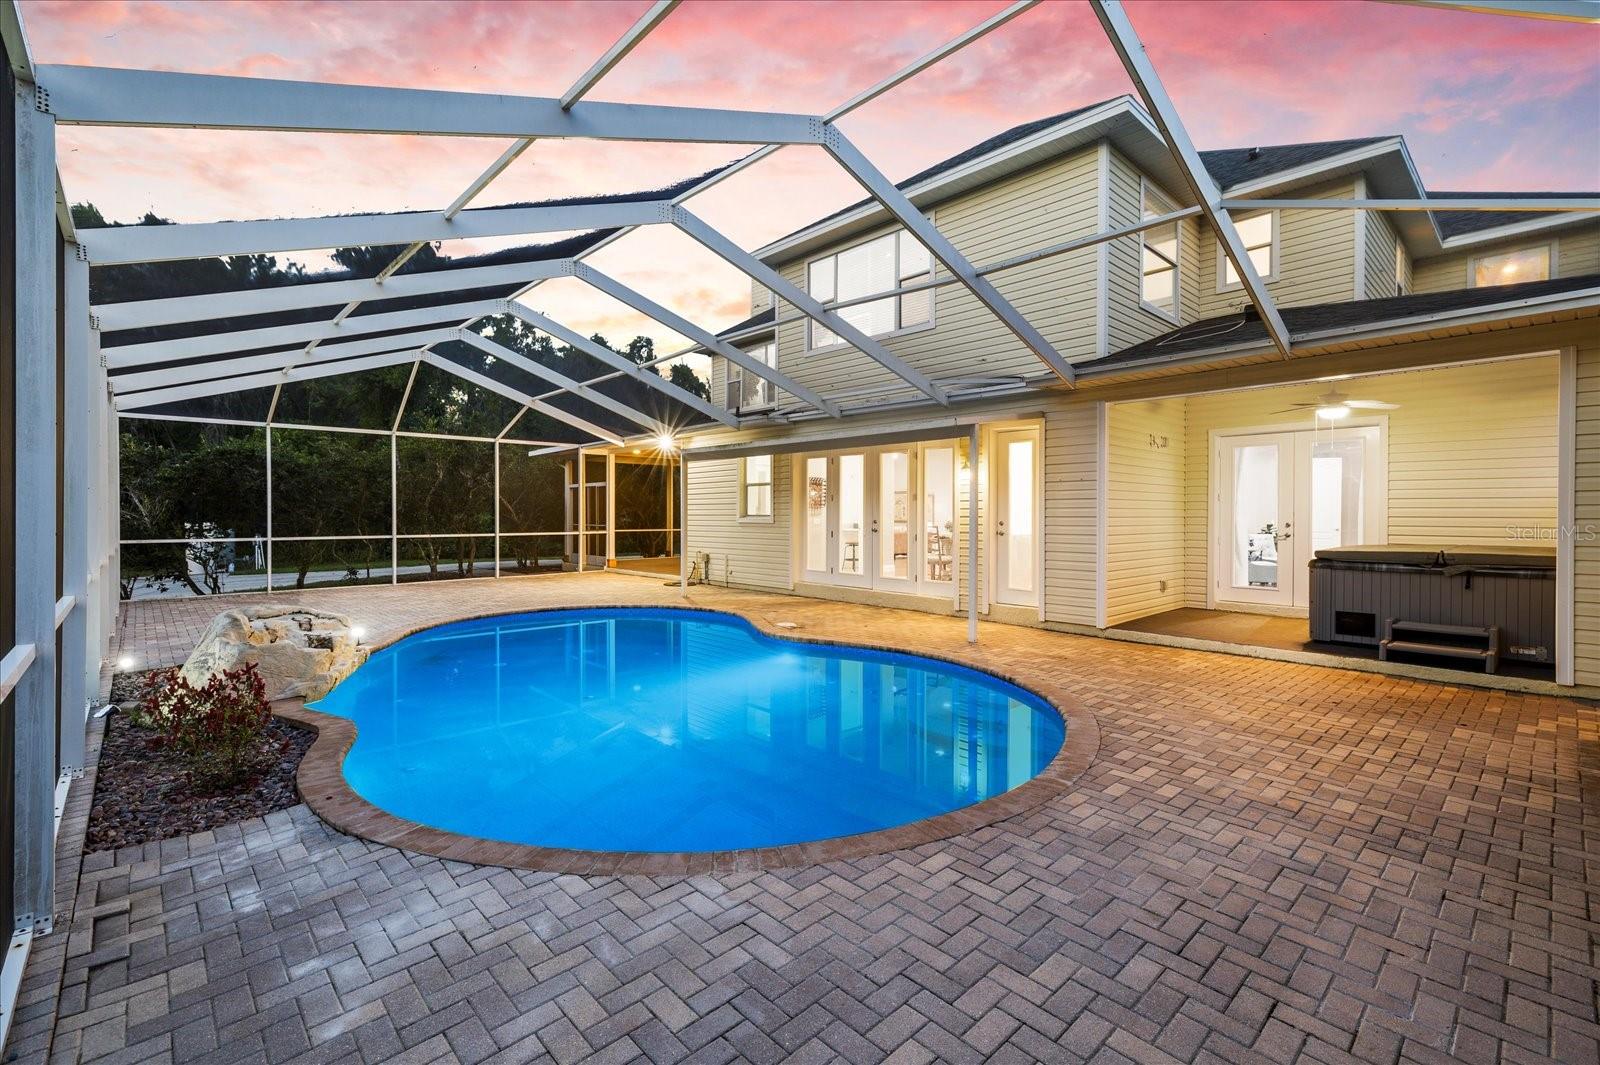 Lovely screened in pool area with patio space.